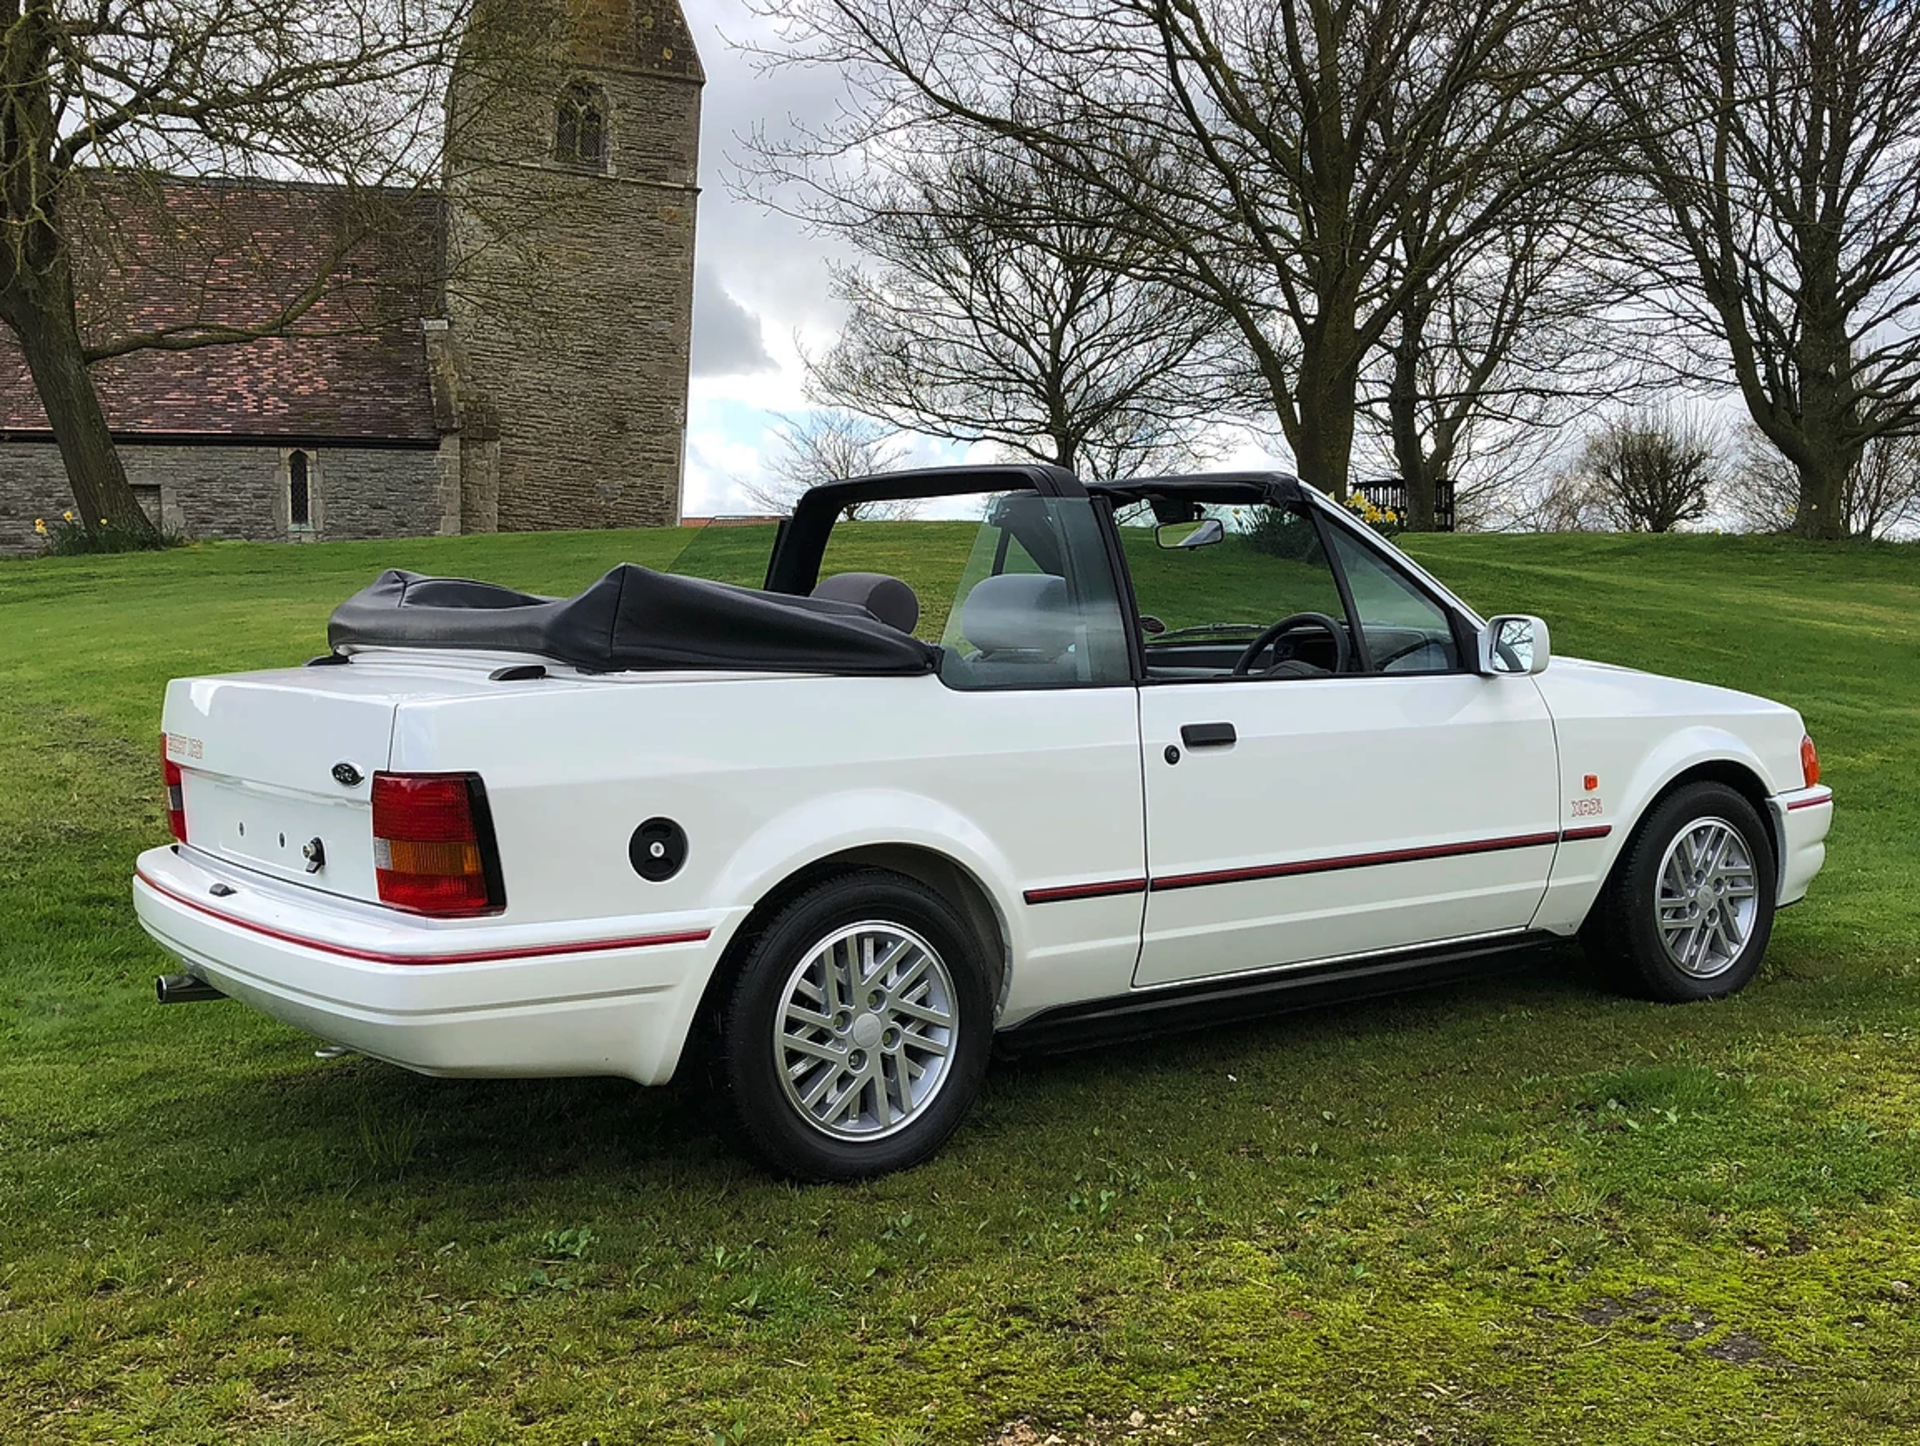 1990 Ford Escort XR3i Convertible - Concours Condition - Image 6 of 12